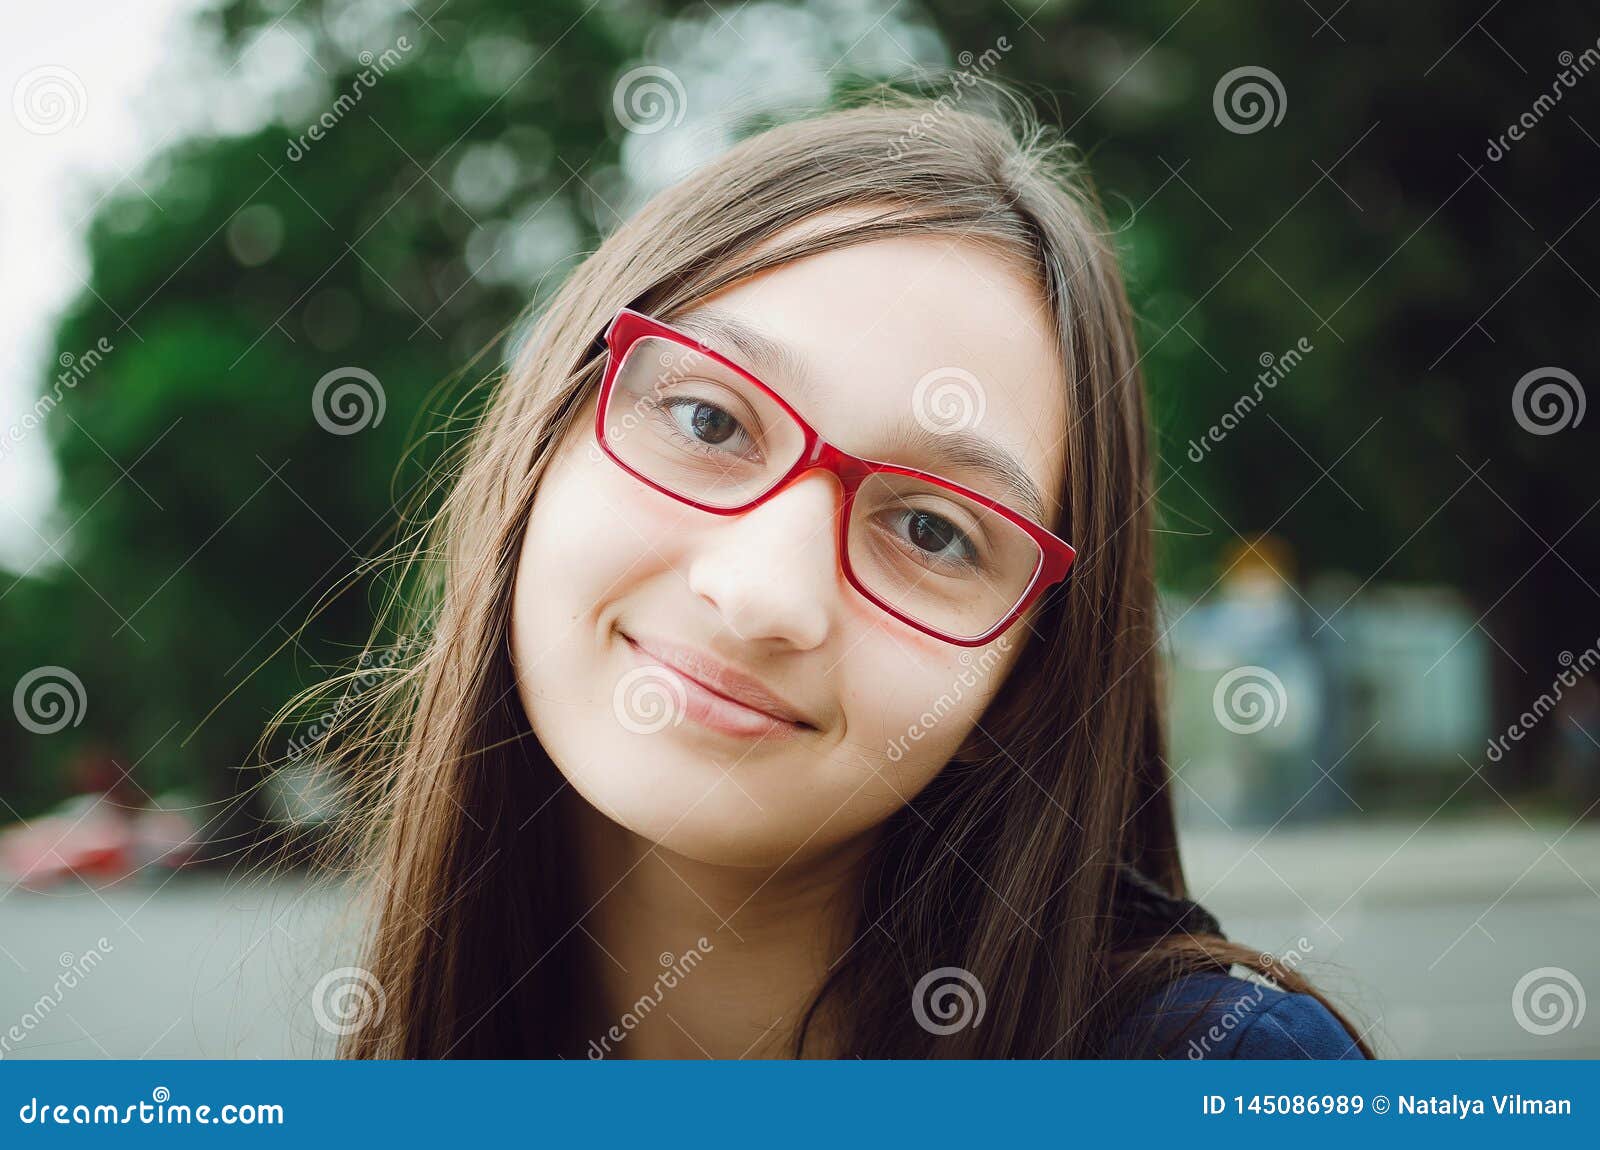 teen girl with glasses